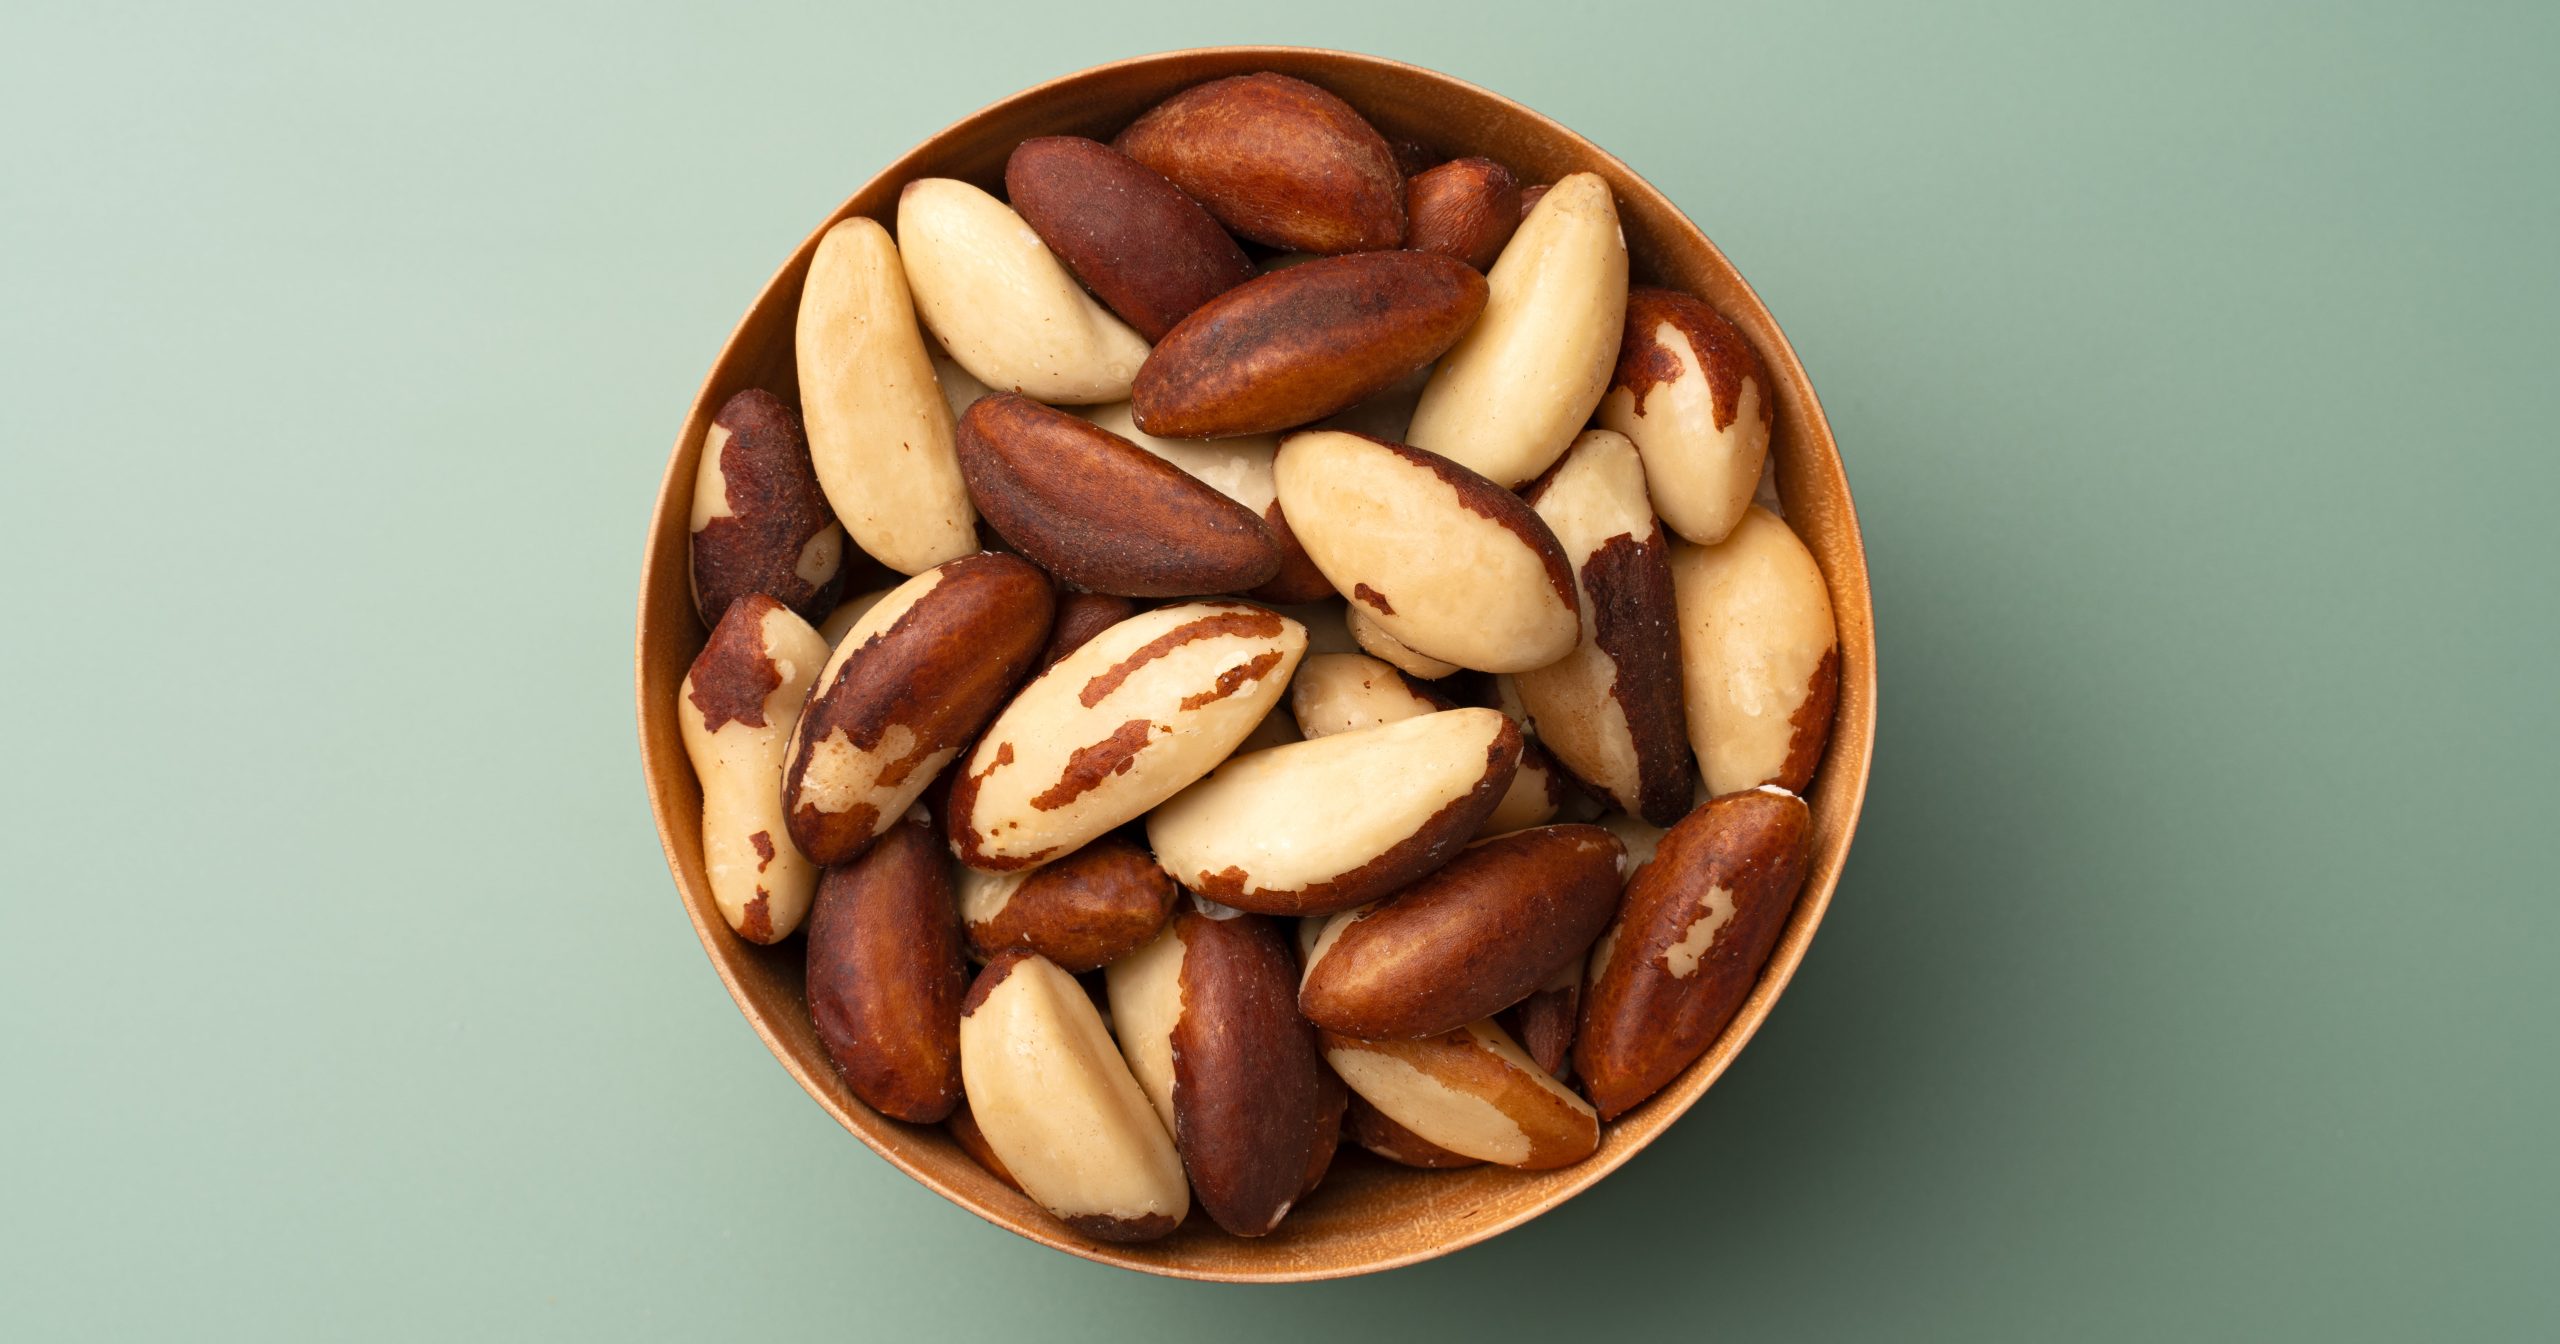 Can Brazil Nuts Actually Assist With Zits Like Folks on TikTok Say?